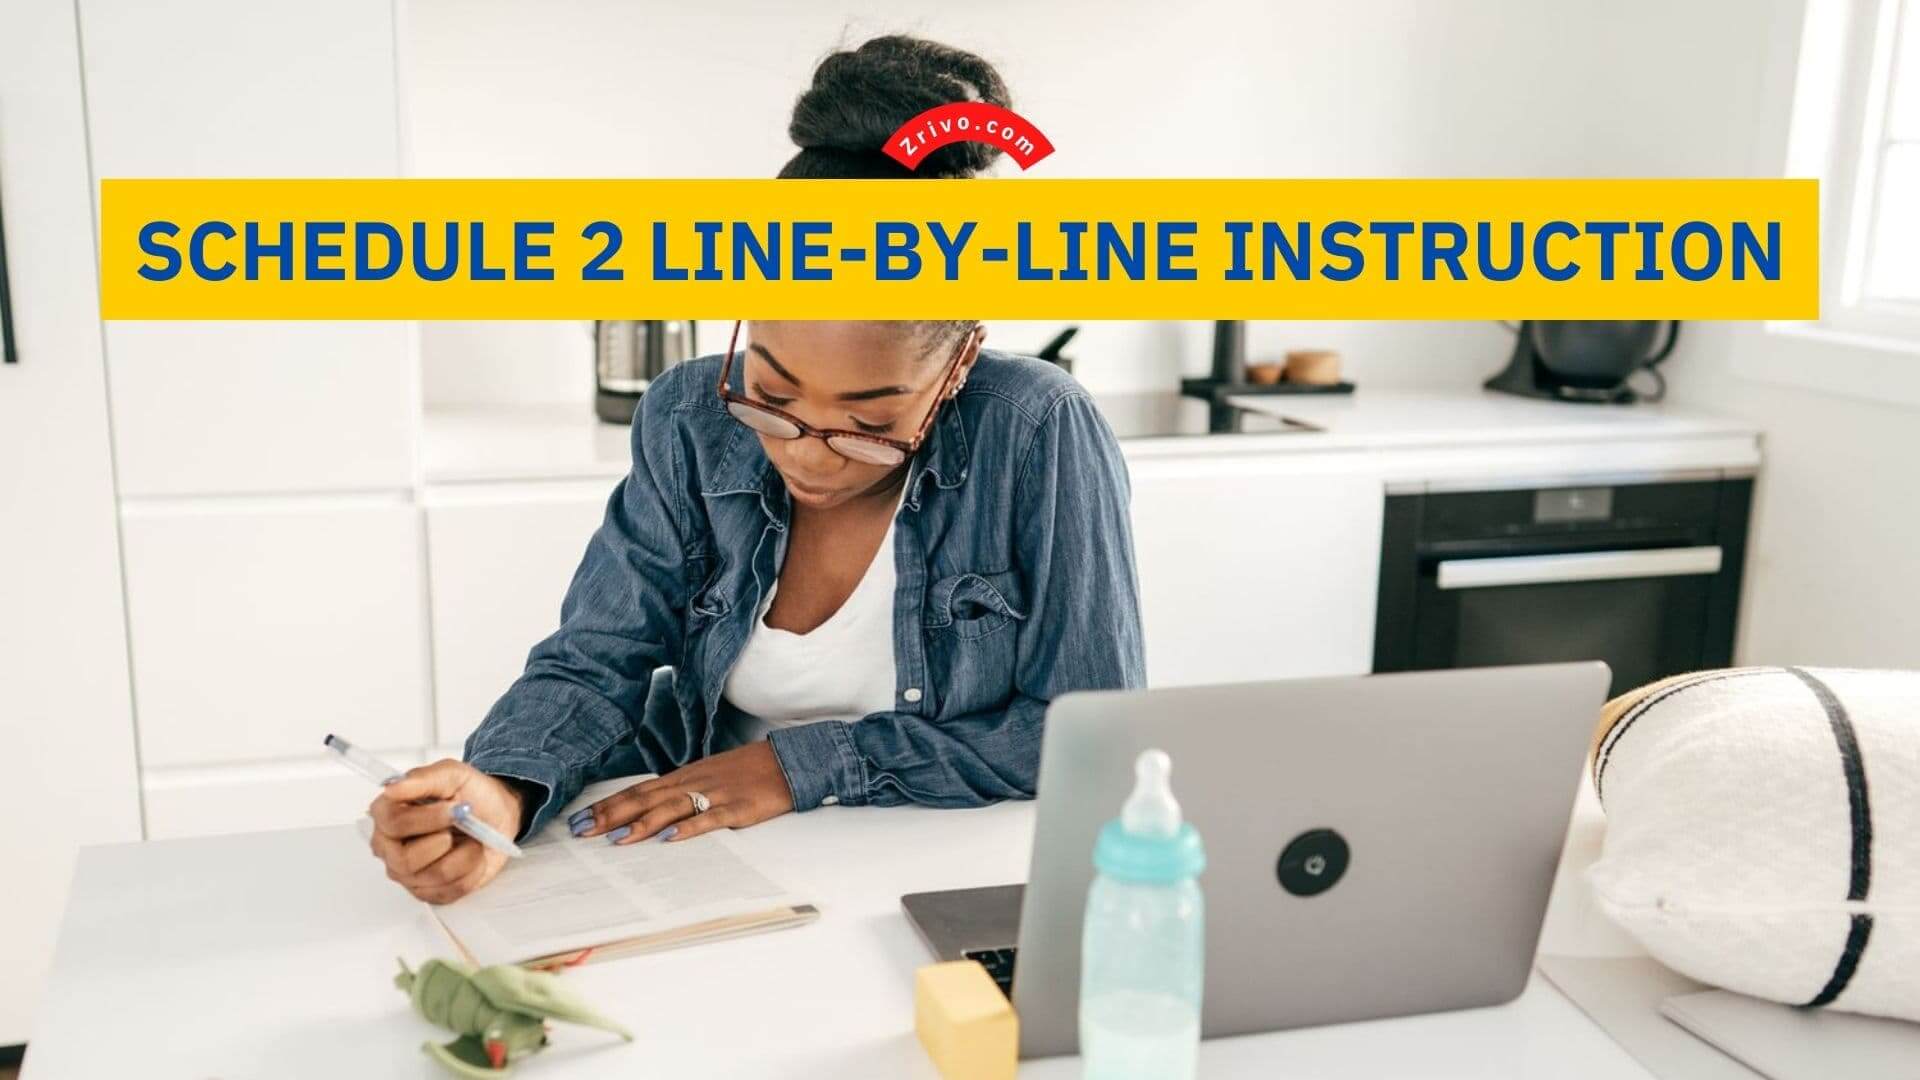 Schedule-2-Line-by-line-instruction-Zrivo-Cover-1